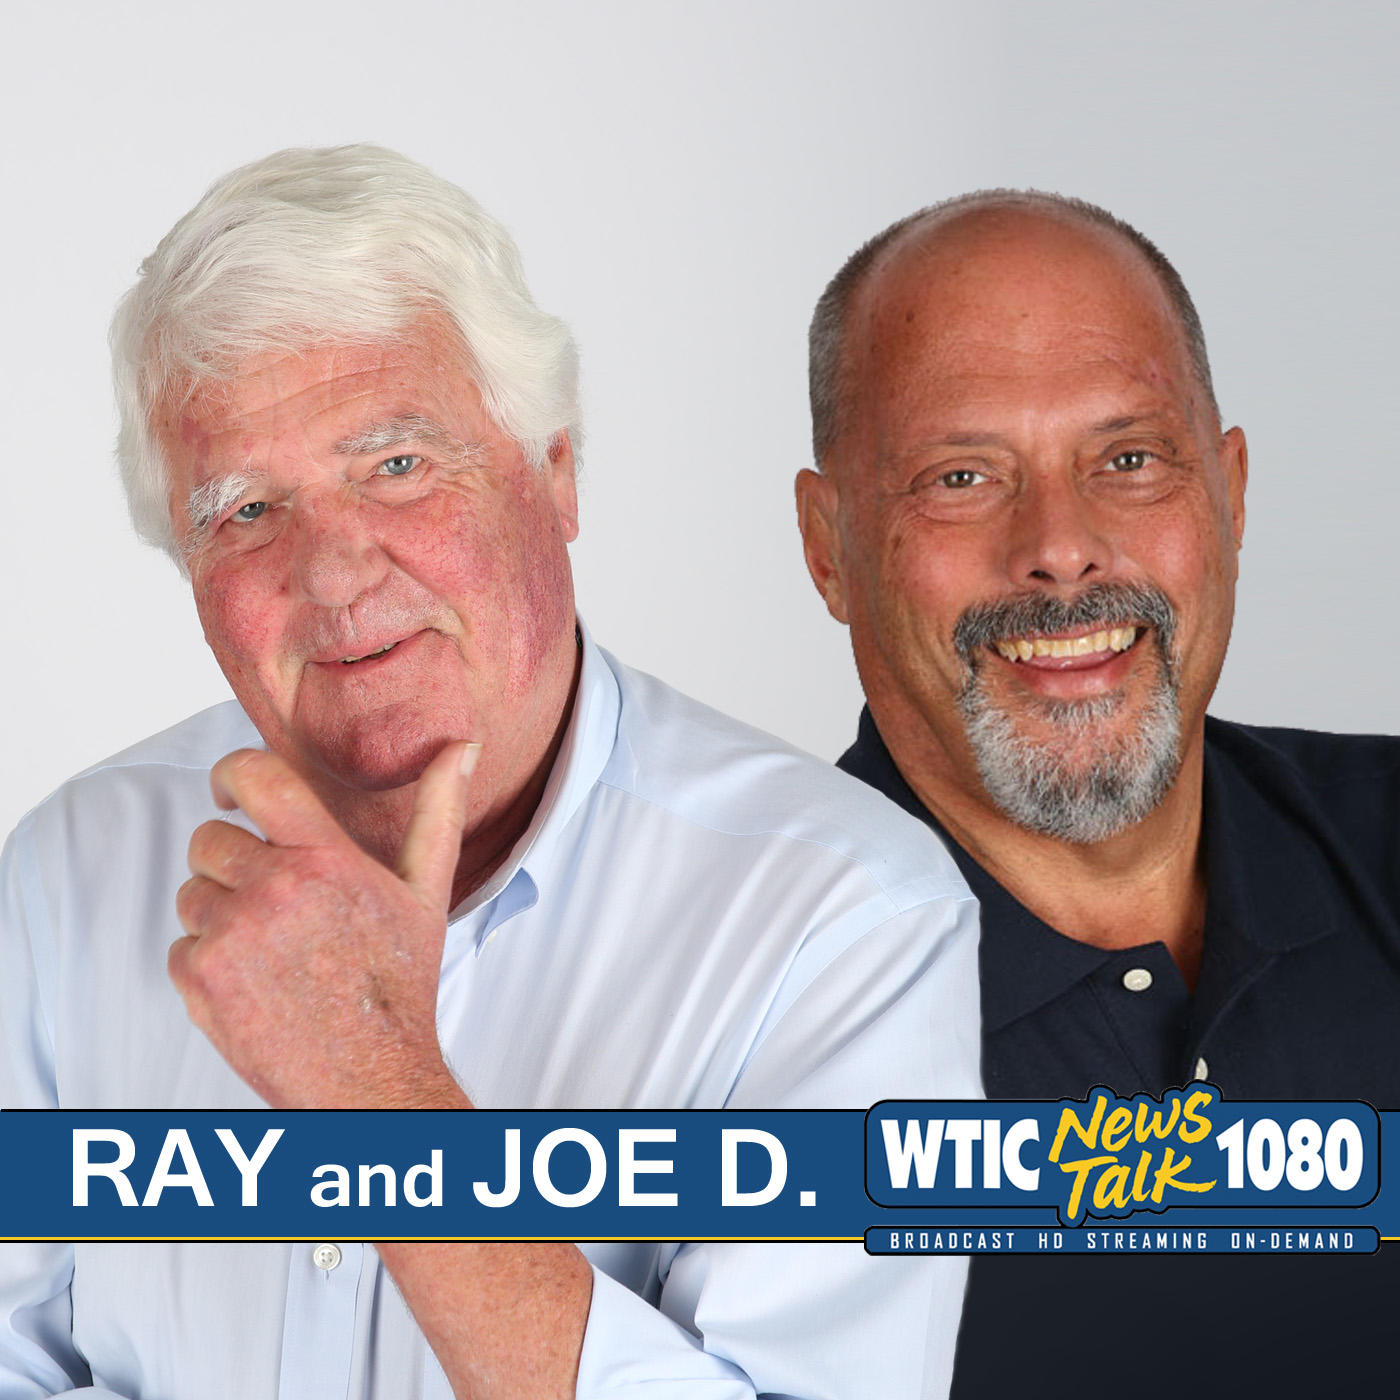 Live on Mornings With Ray